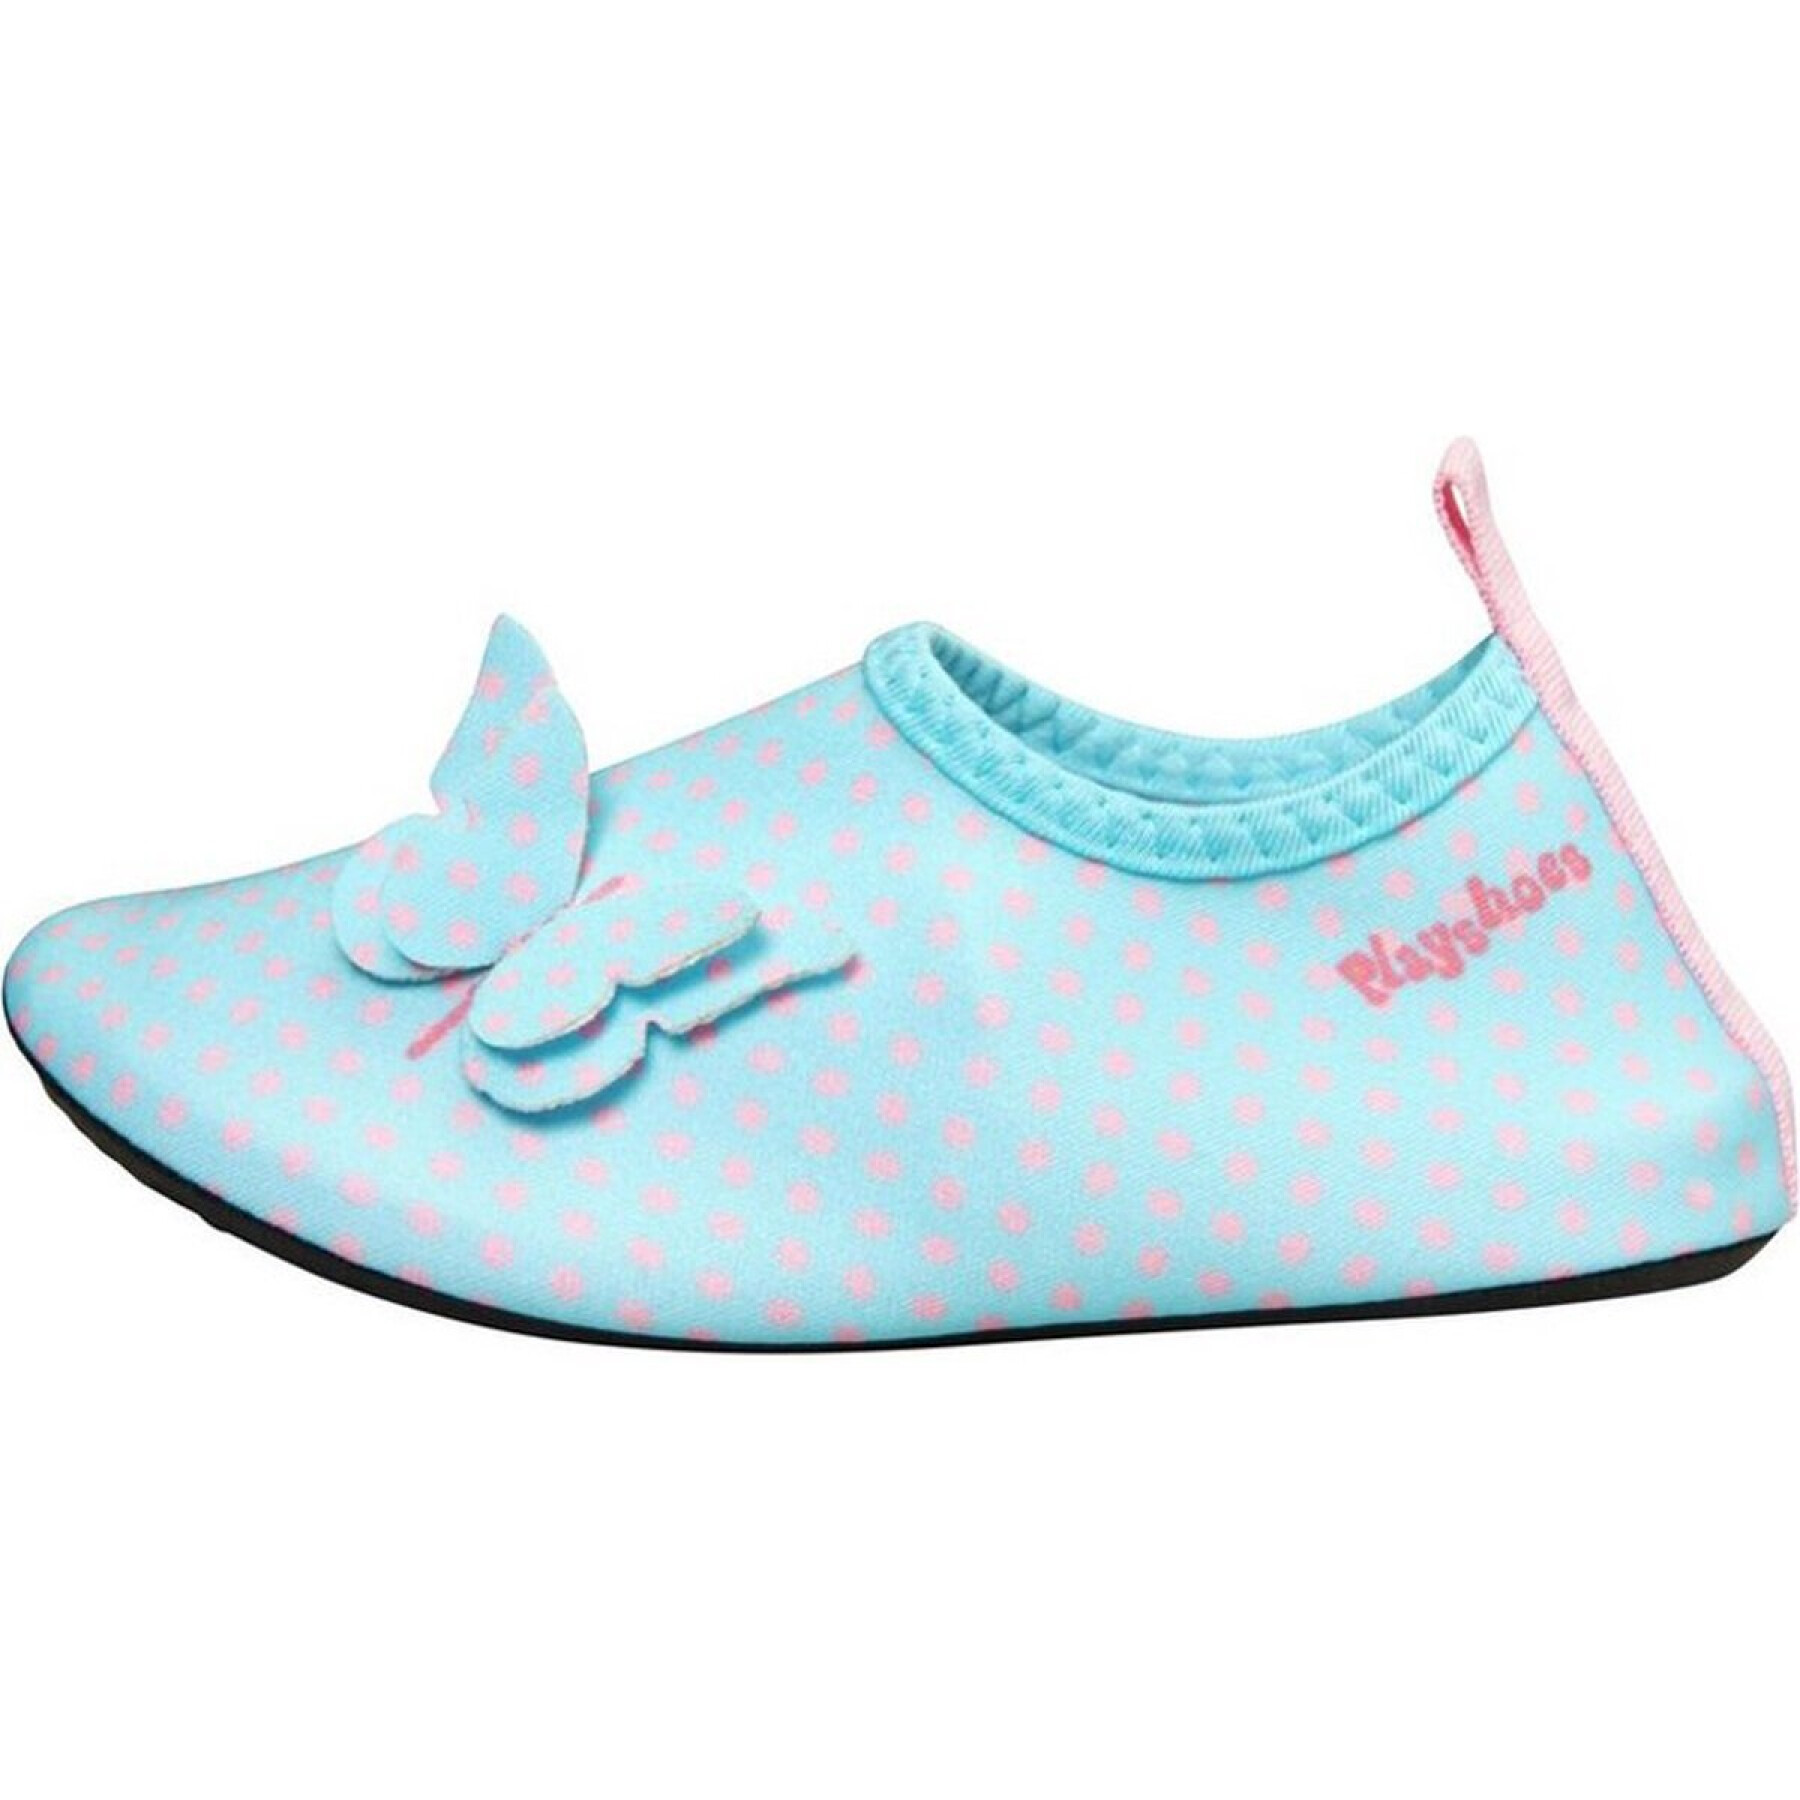 Girl's aquatic slippers Playshoes Butterfly